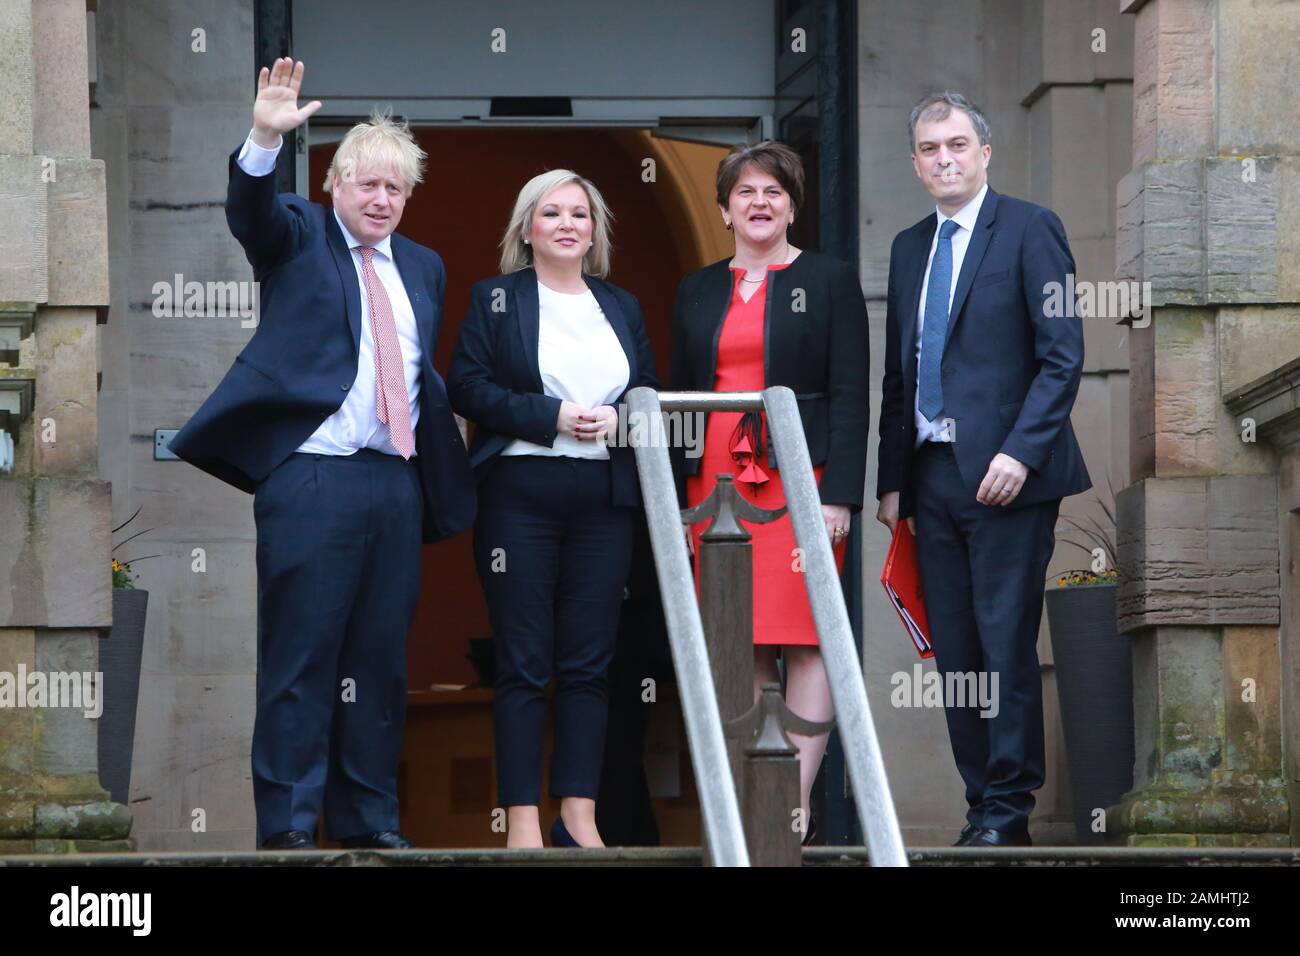 Belfast, UK. 13th Jan, 2020. British Prime Minister Boris Johnson (1st L) and British Secretary of State for Northern Ireland Julian Smith (1st R) are greeted by Northern Ireland First Minister Arlene Foster (2nd R) of the Democratic Unionist Party (DUP) and Deputy First Minister Michelle O'Neill of Sinn Fein in Belfast, Northern Ireland, the United Kingdom, on Jan. 13, 2020. Boris Johnson said Monday during a visit to Belfast, Northern Ireland that he hopes and is 'confident' to secure a zero-tariff, zero-quota agreement with the European Union (EU). Credit: Xinhua/Alamy Live News Stock Photo